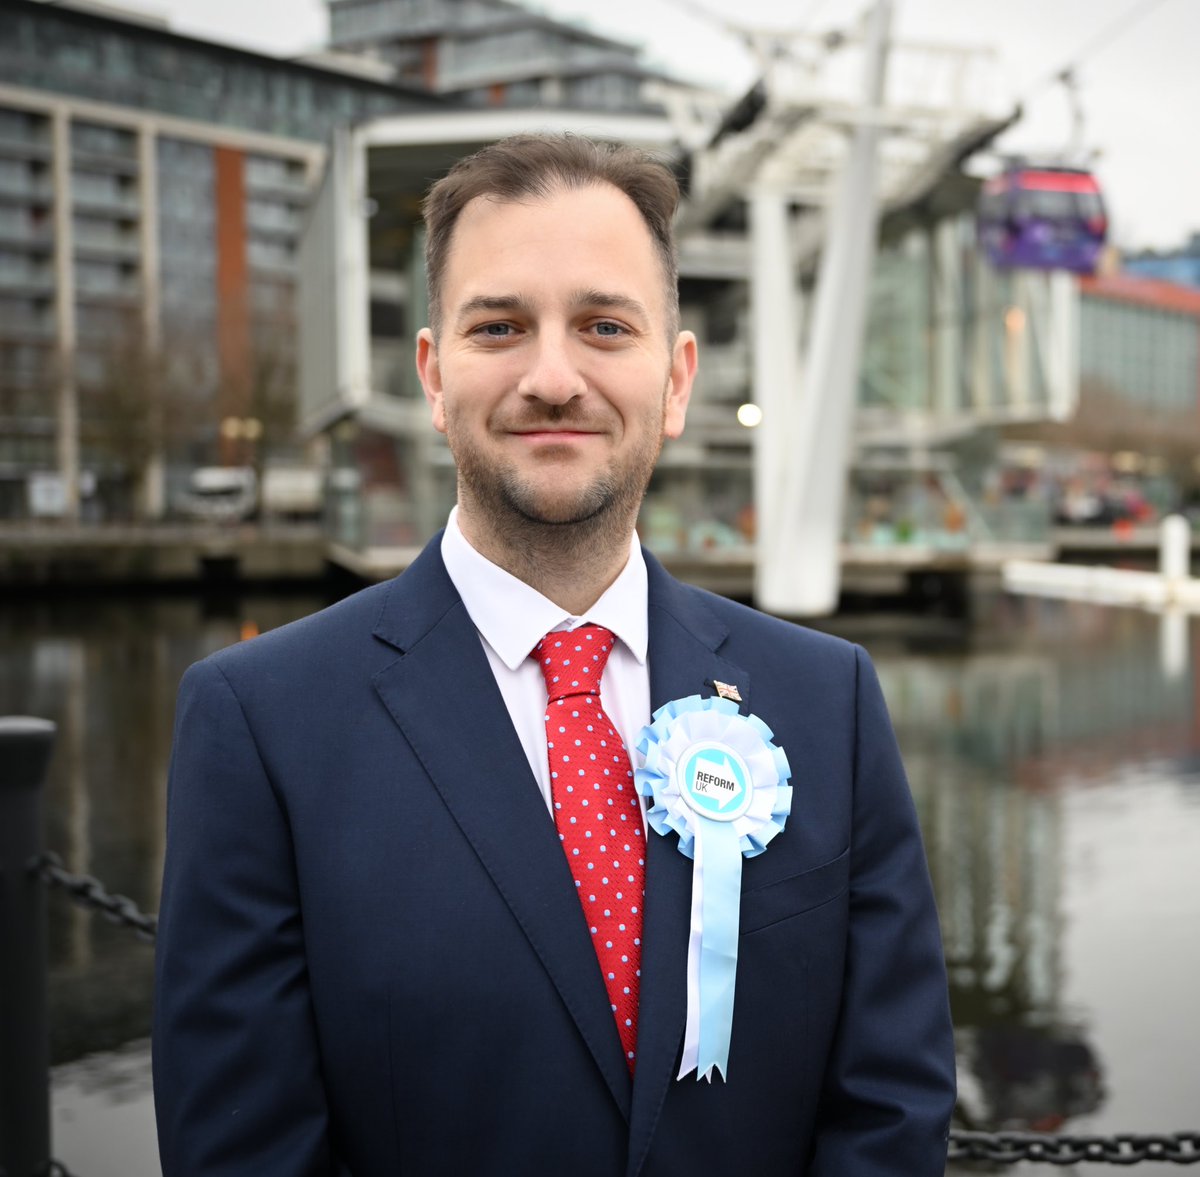 I am proud to officially announce my candidacy for @reformparty_uk for the London Assembly elections Along side @Wilson4Woodford @HowardCCox @IPricePsychAuth & team we will be the strong voice the country wants London to have May 2nd vote Reform UK 🗳️ 🇬🇧